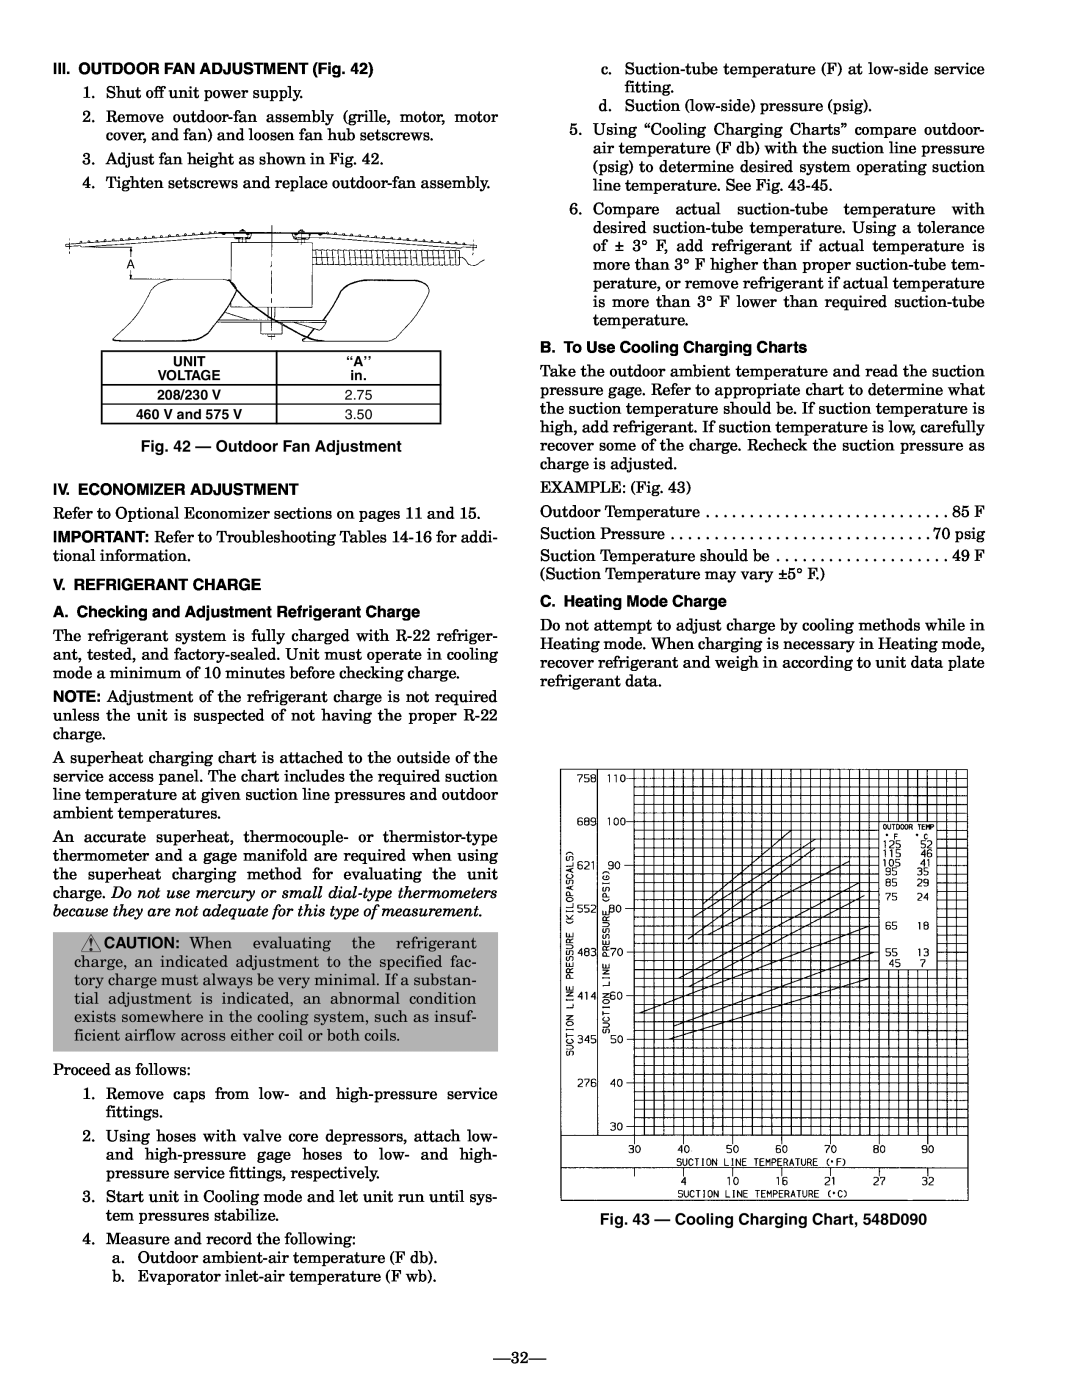 Bryant 548D III.OUTDOOR FAN ADJUSTMENT Fig, Outdoor Fan Adjustment, Iv. Economizer Adjustment, V. Refrigerant Charge 